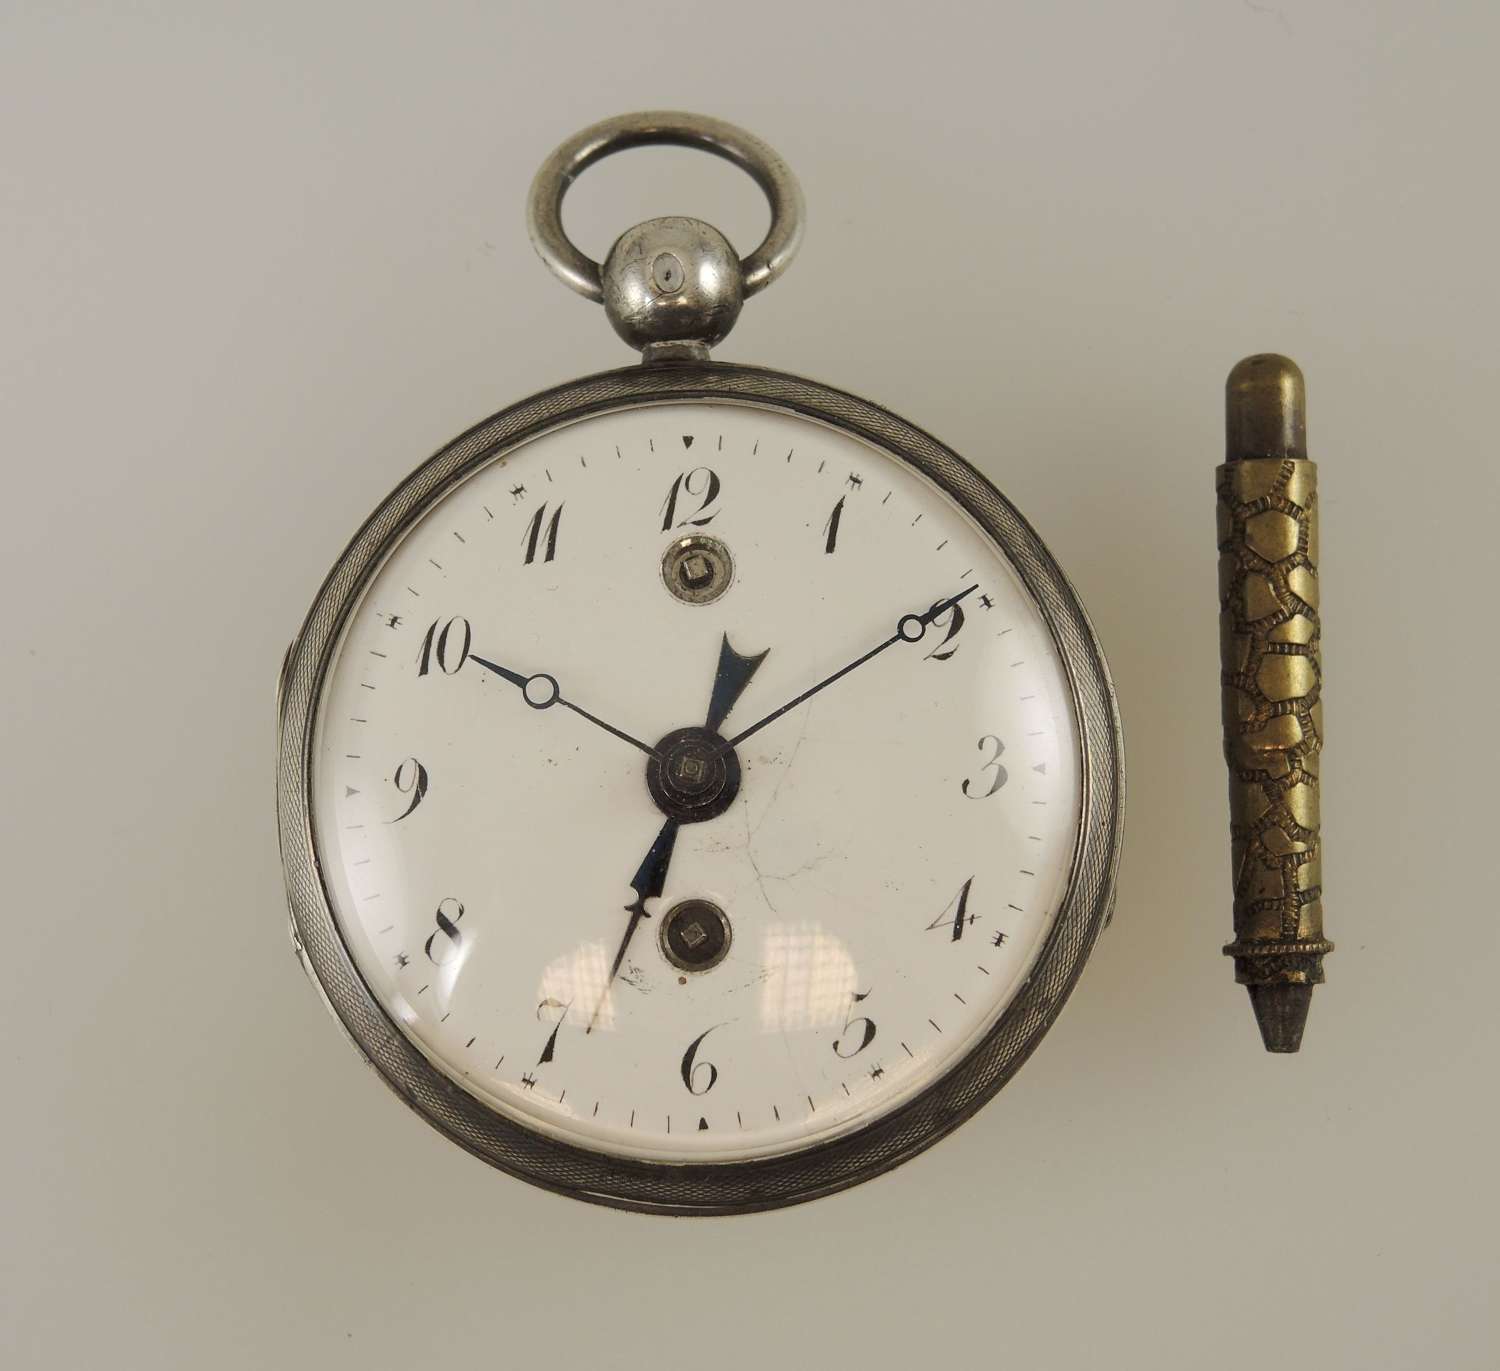 Silver French verge pocket watch with alarm function c1810